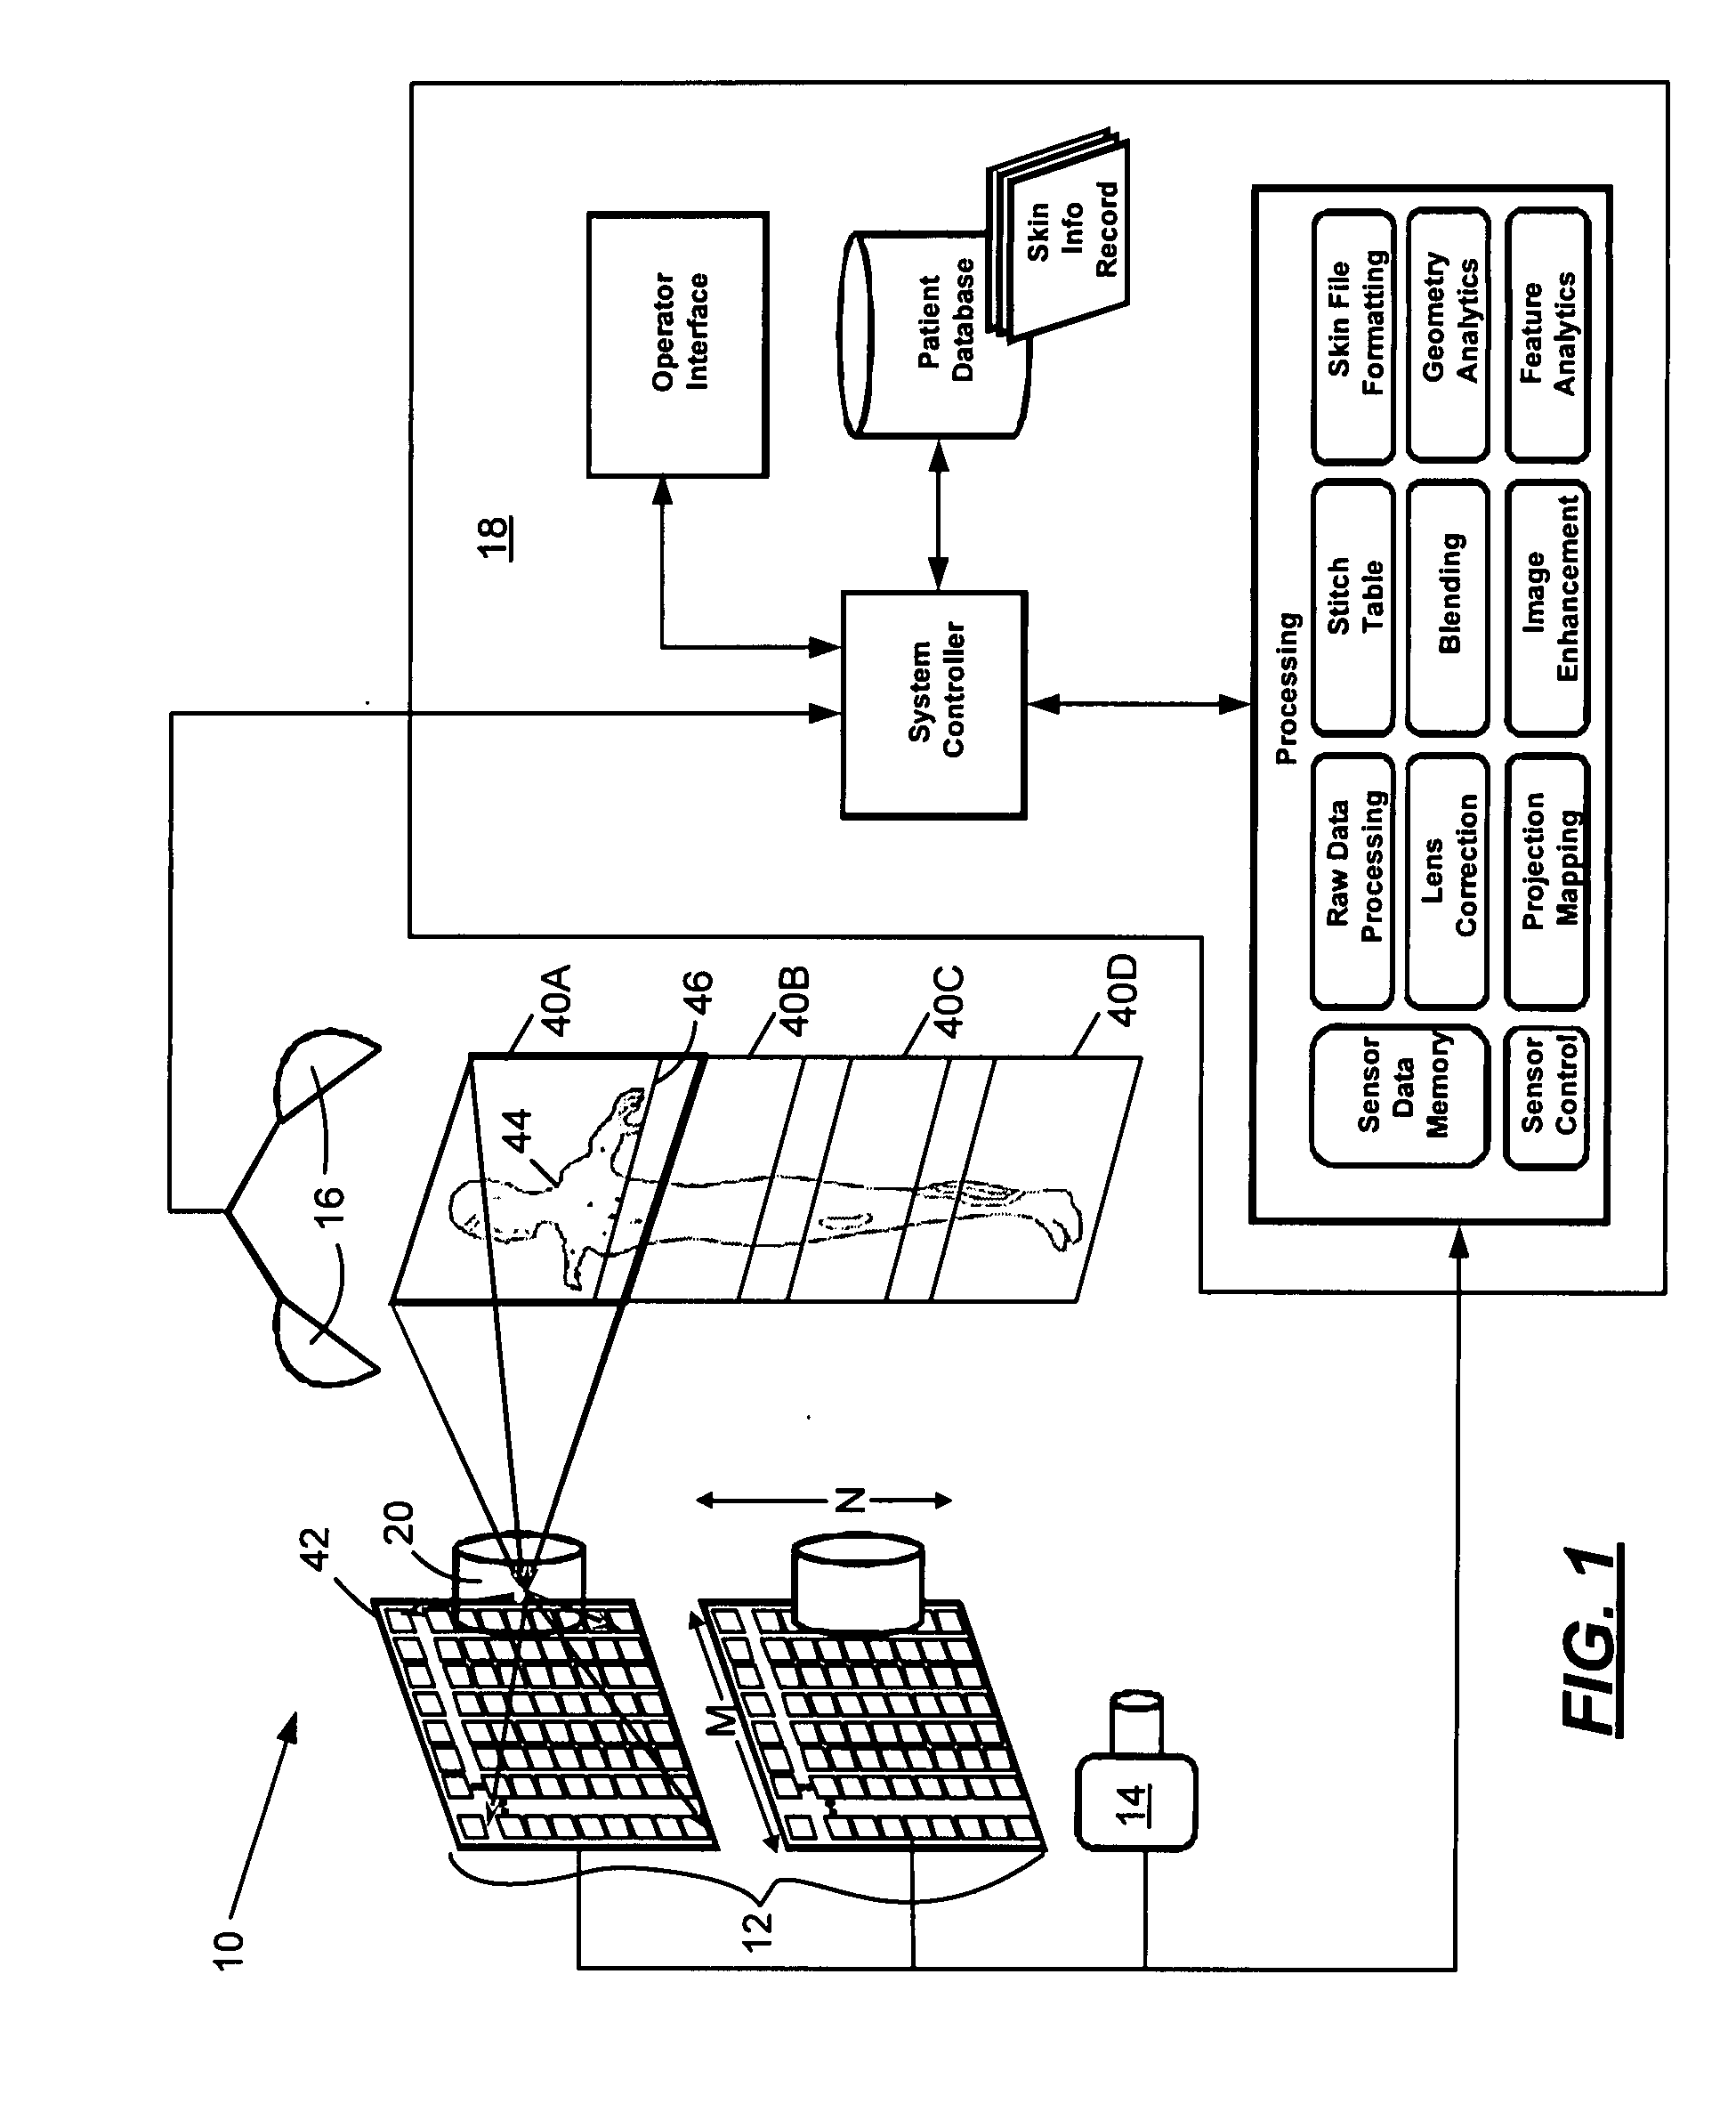 Method and apparatus for skin documentation and analysis